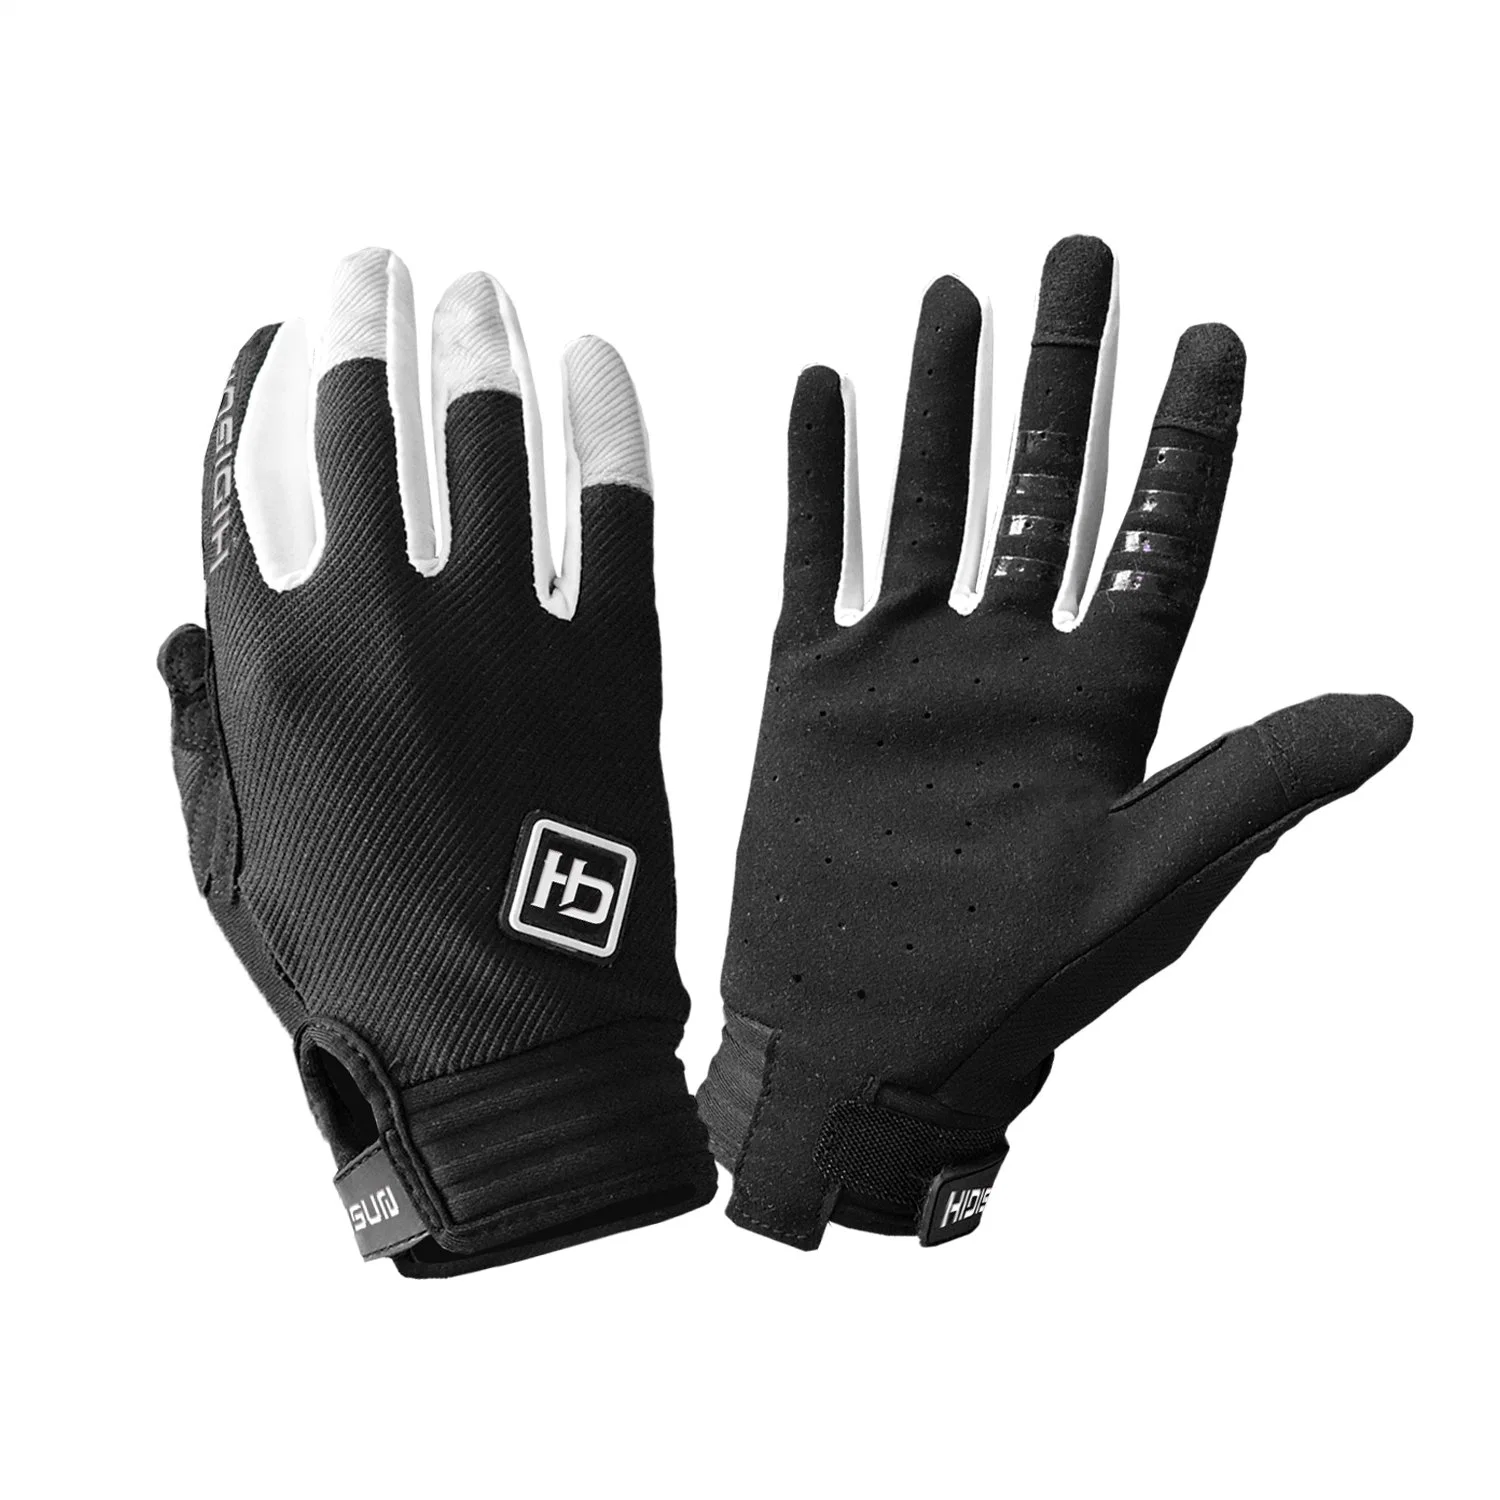 Cycling Gloves Horse Riding Driving Breathable Motorcycling Multi-Purpose Outdoor Sport Protection